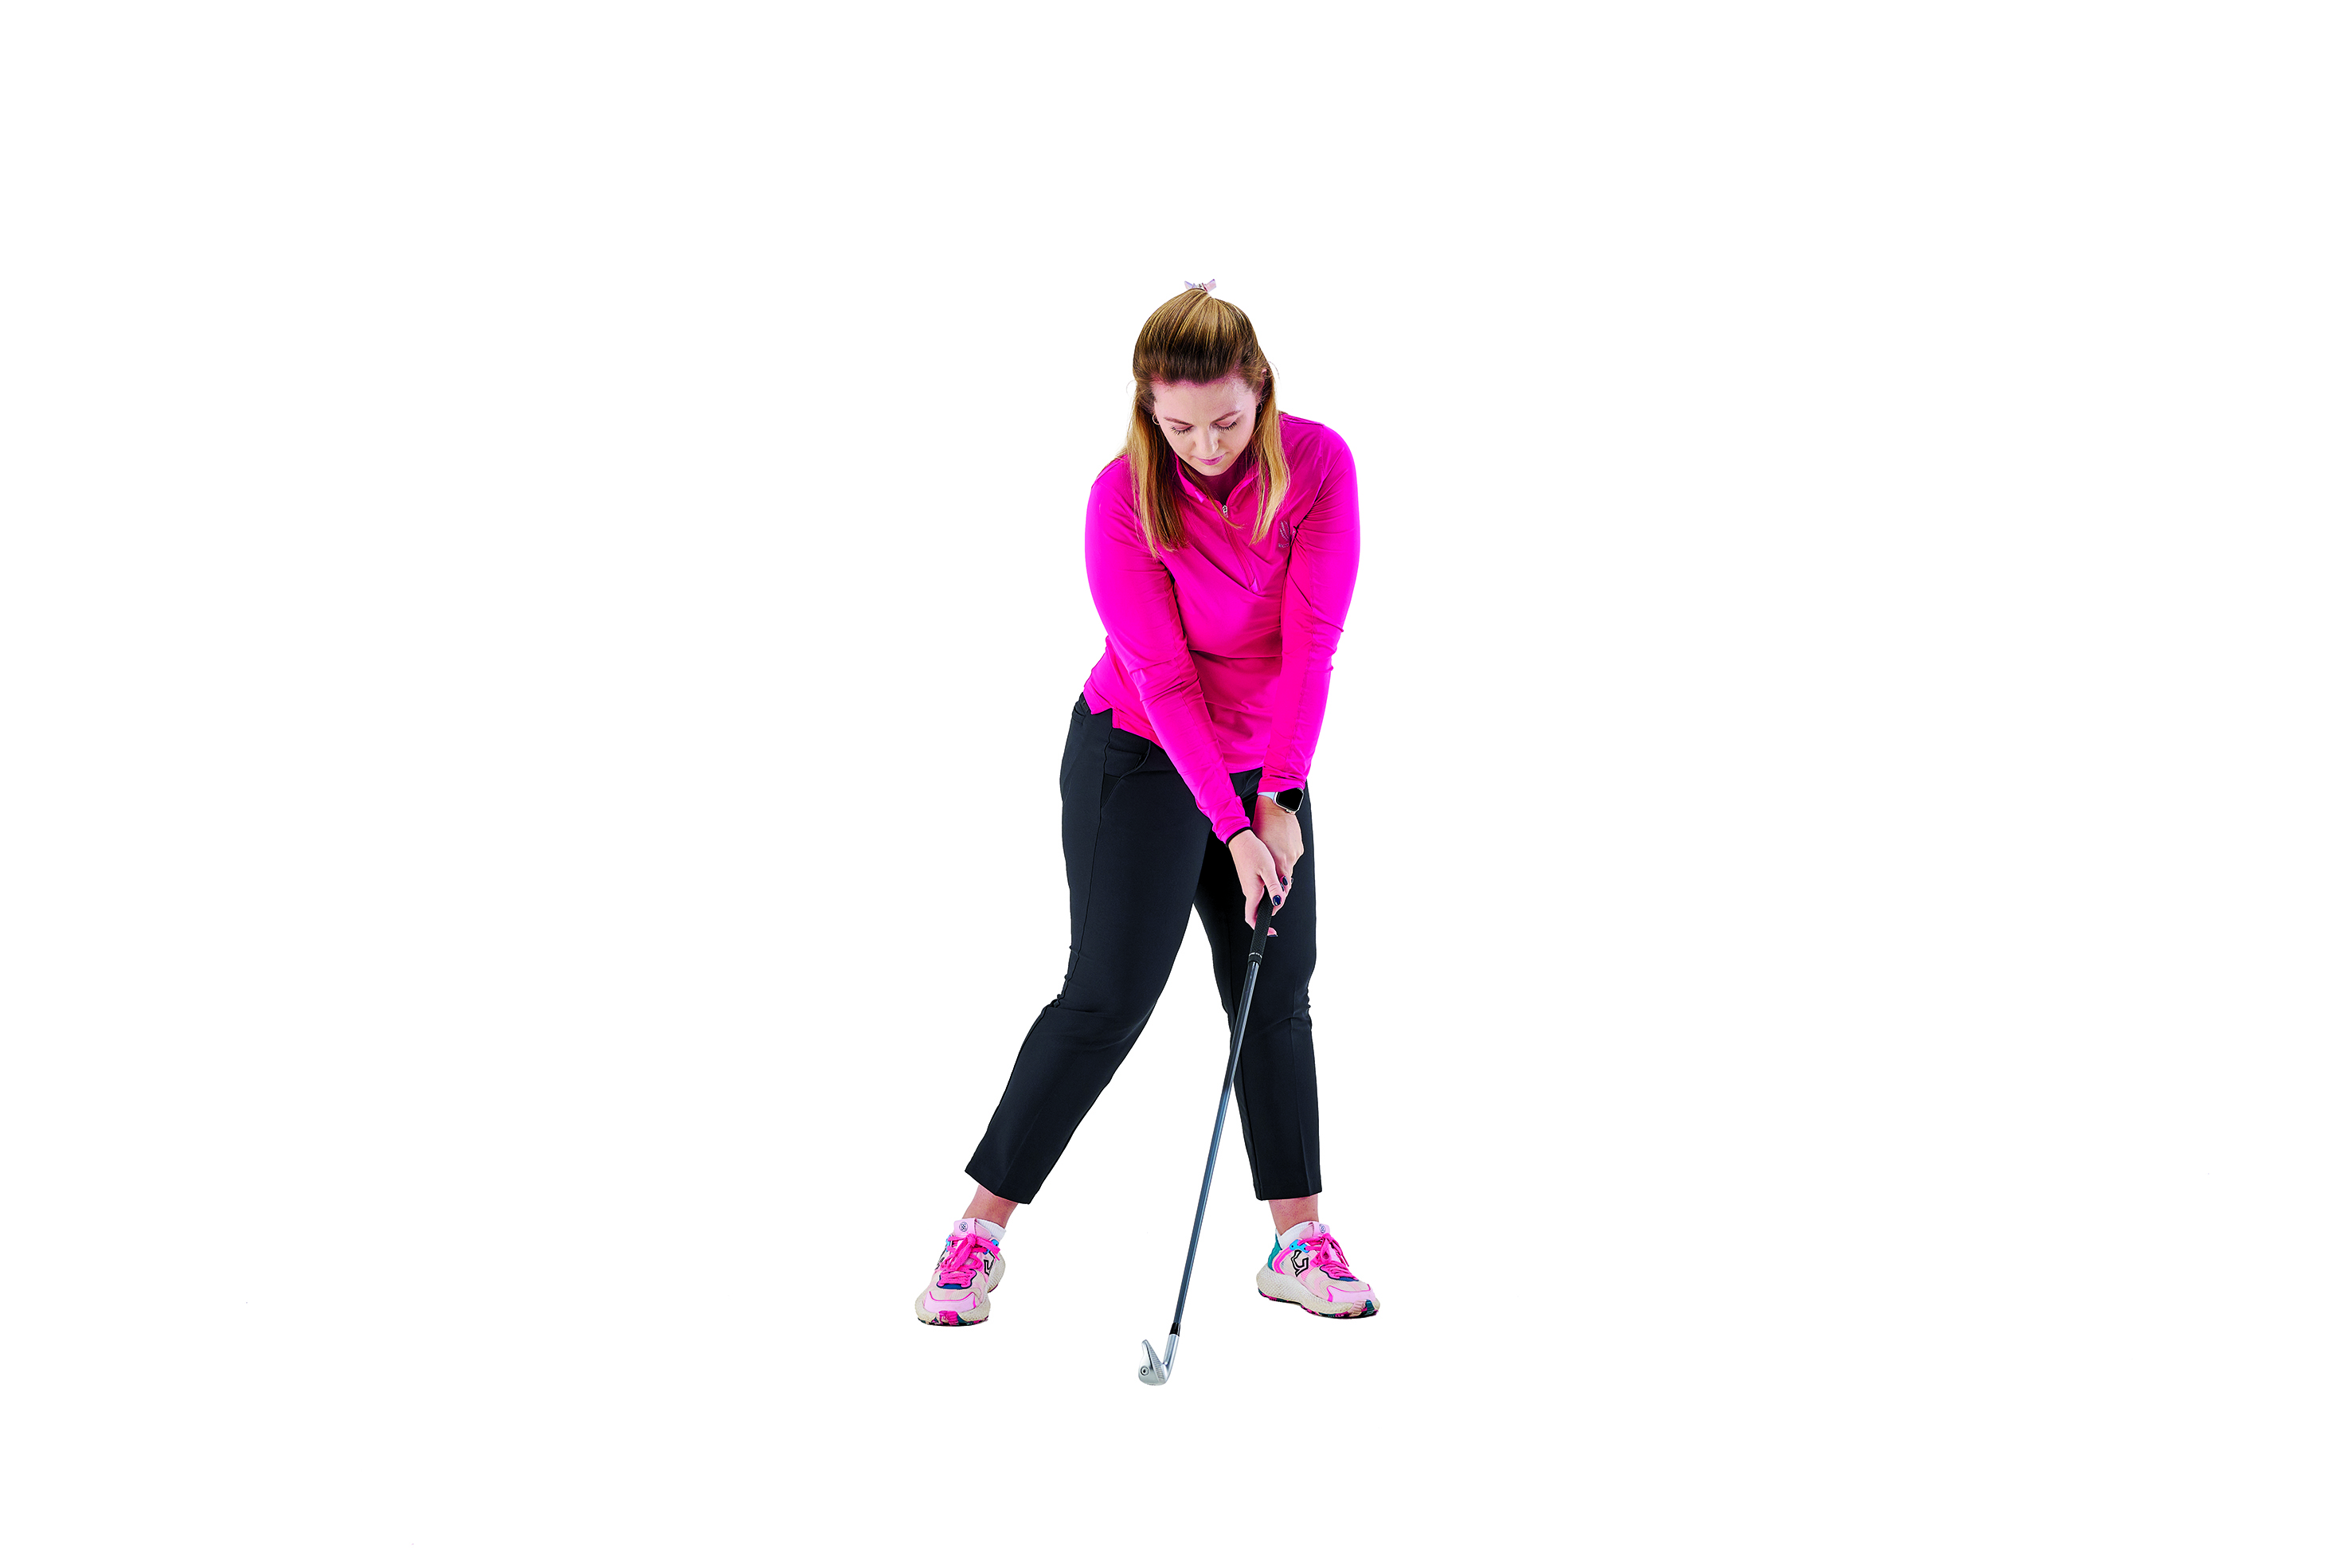 Golf Monthly Top 50 Coach Jo Taylor demonstrating the correct impact position for the golf swing